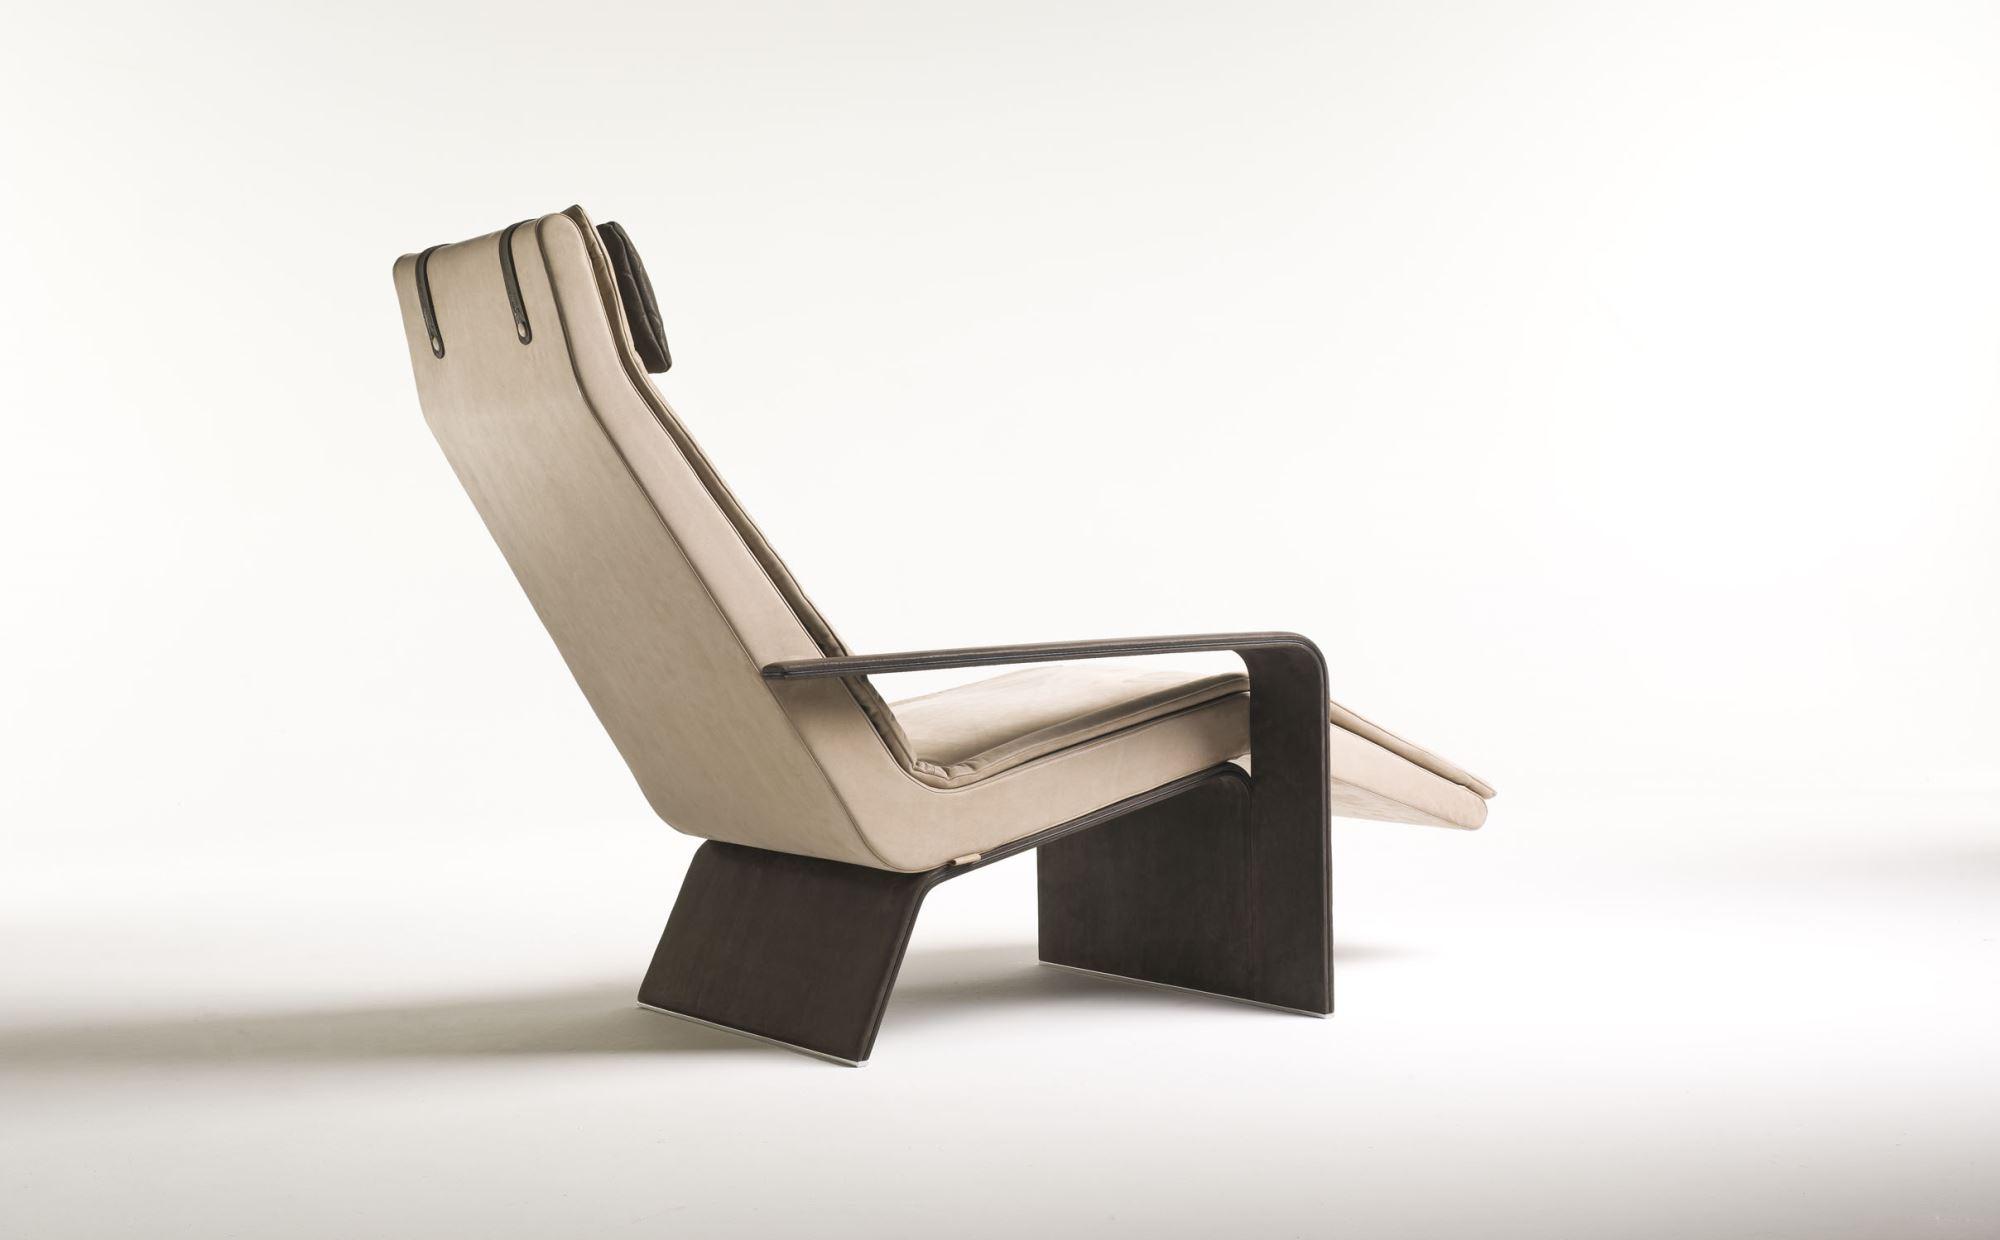 Ala is a chaise lounge designed by Matteo Nunziati . Aims to find the balance between a linear and at the same time contemporary and sophisticated design.